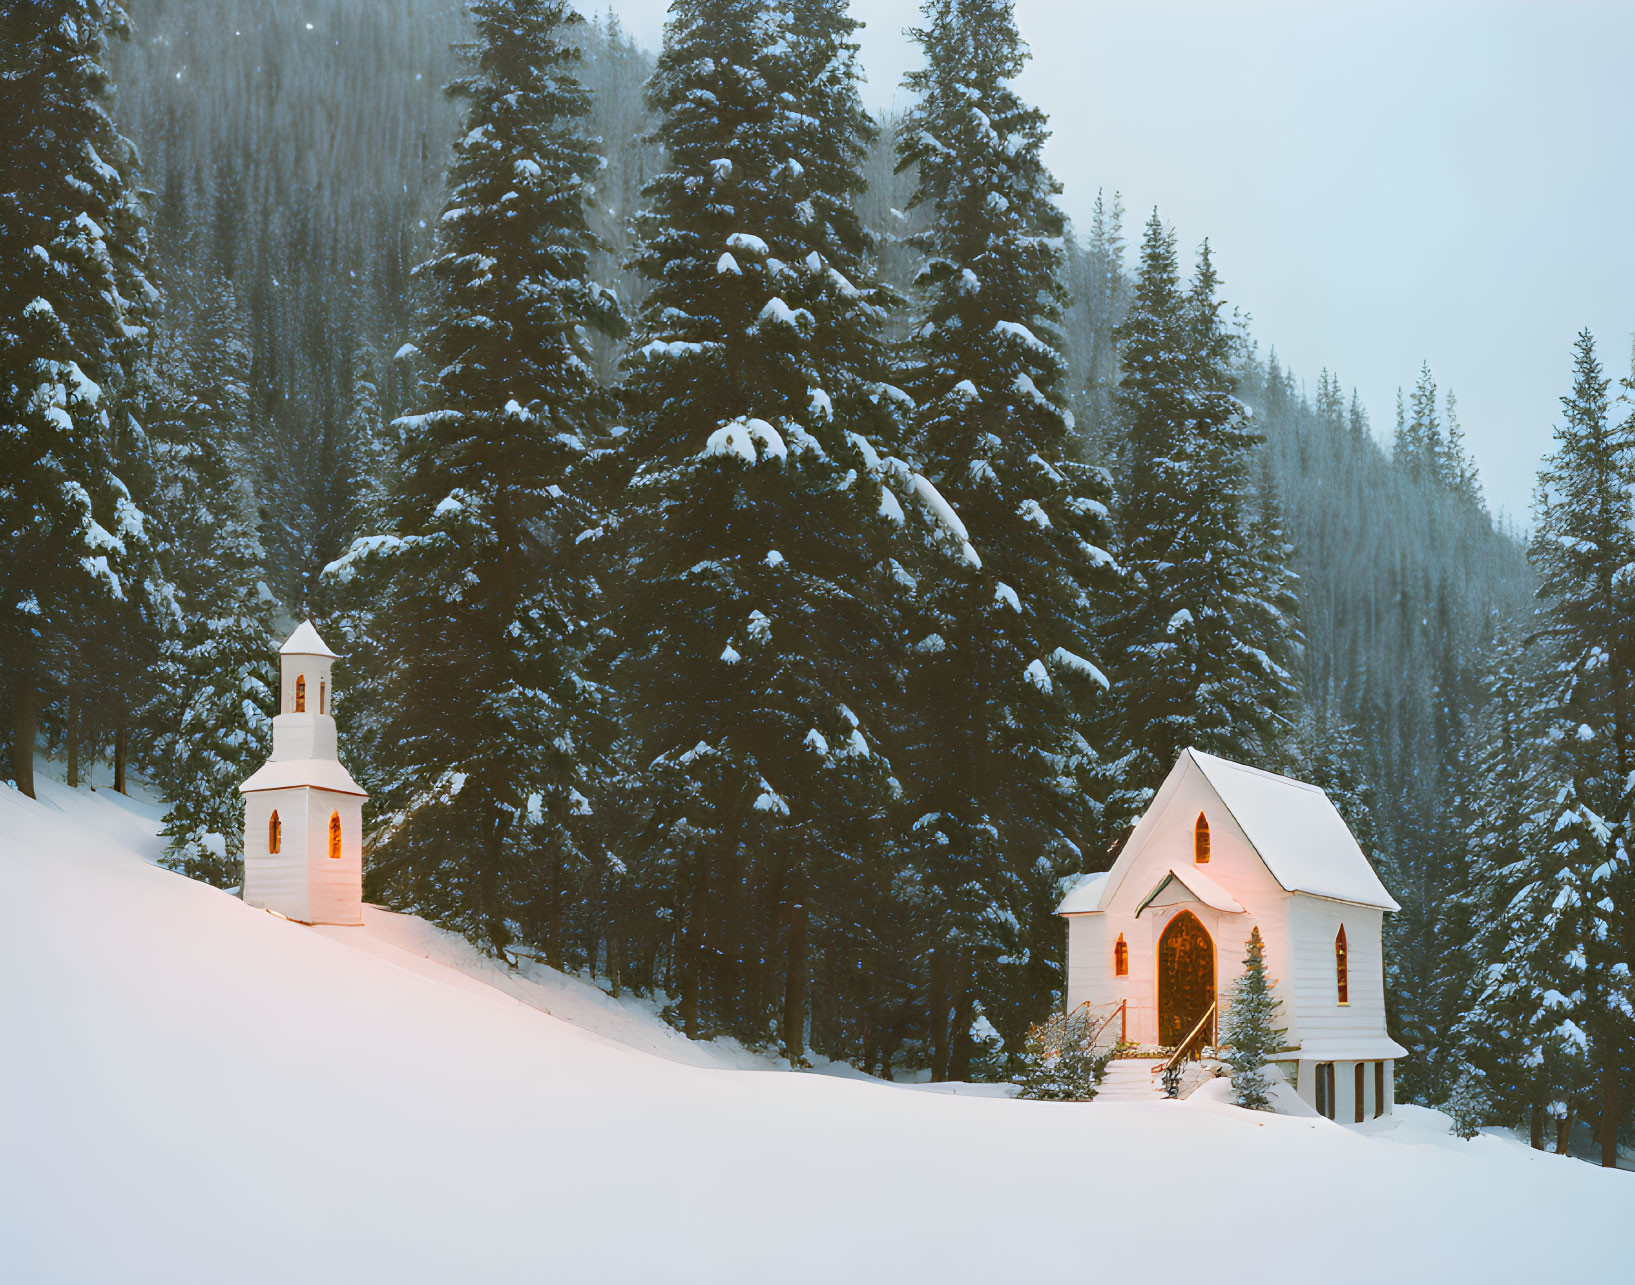 Snowy Forest Chapel Amid Pine Trees in Winter